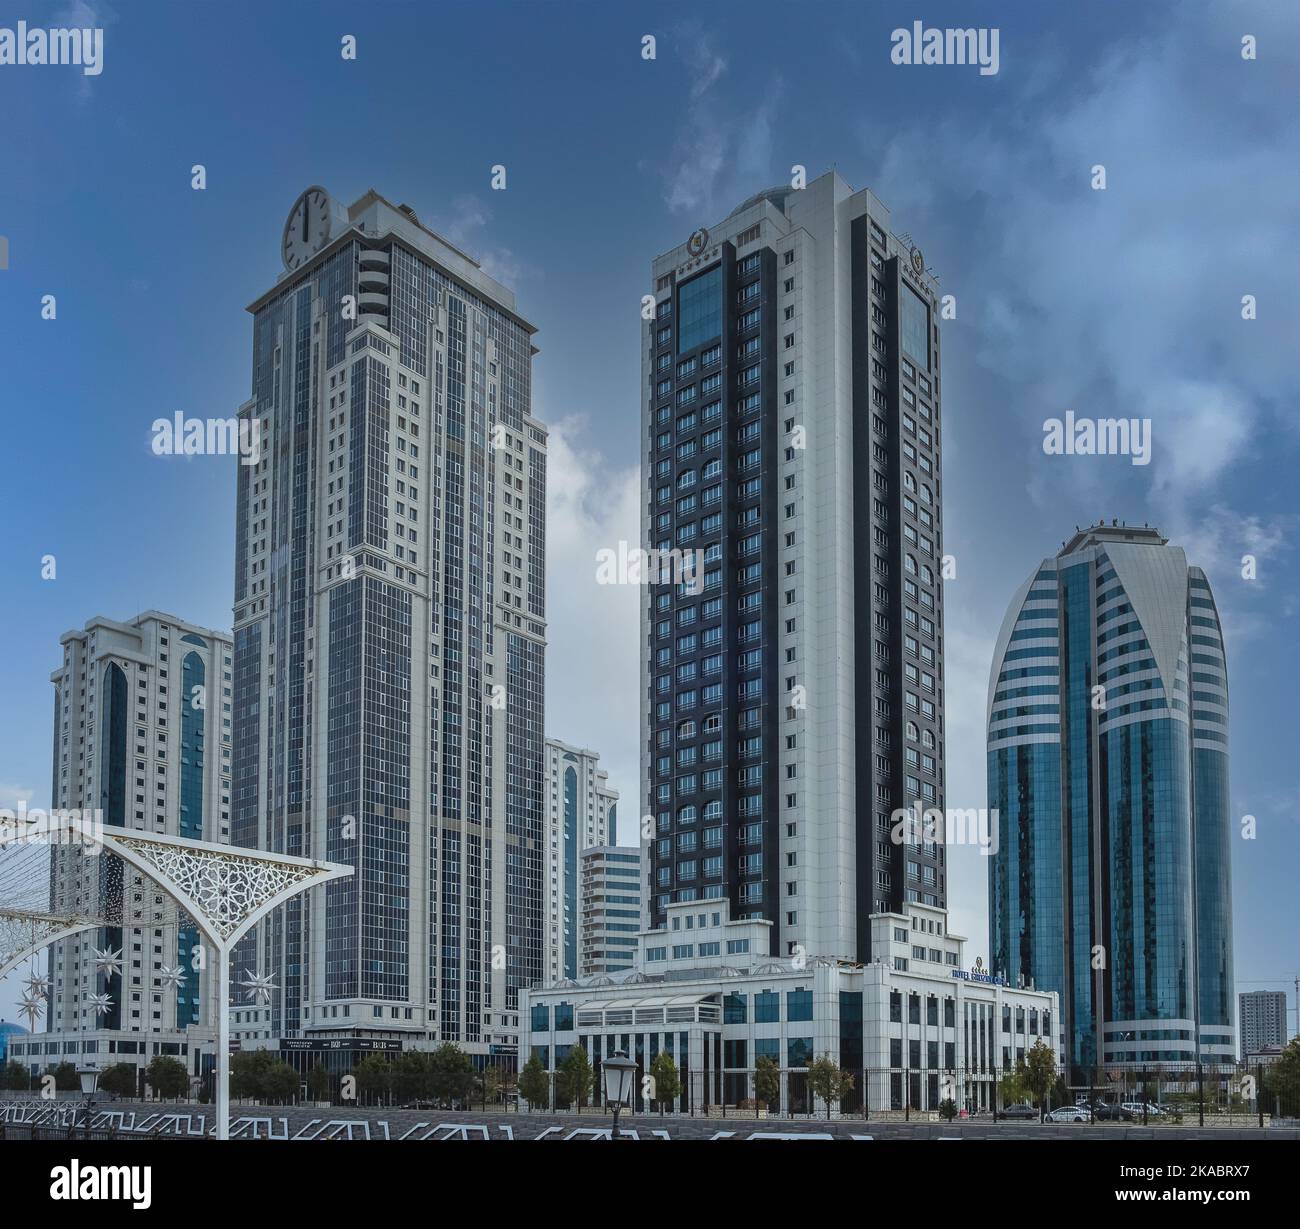 Complex of high-rise buildings in the city center Stock Photo